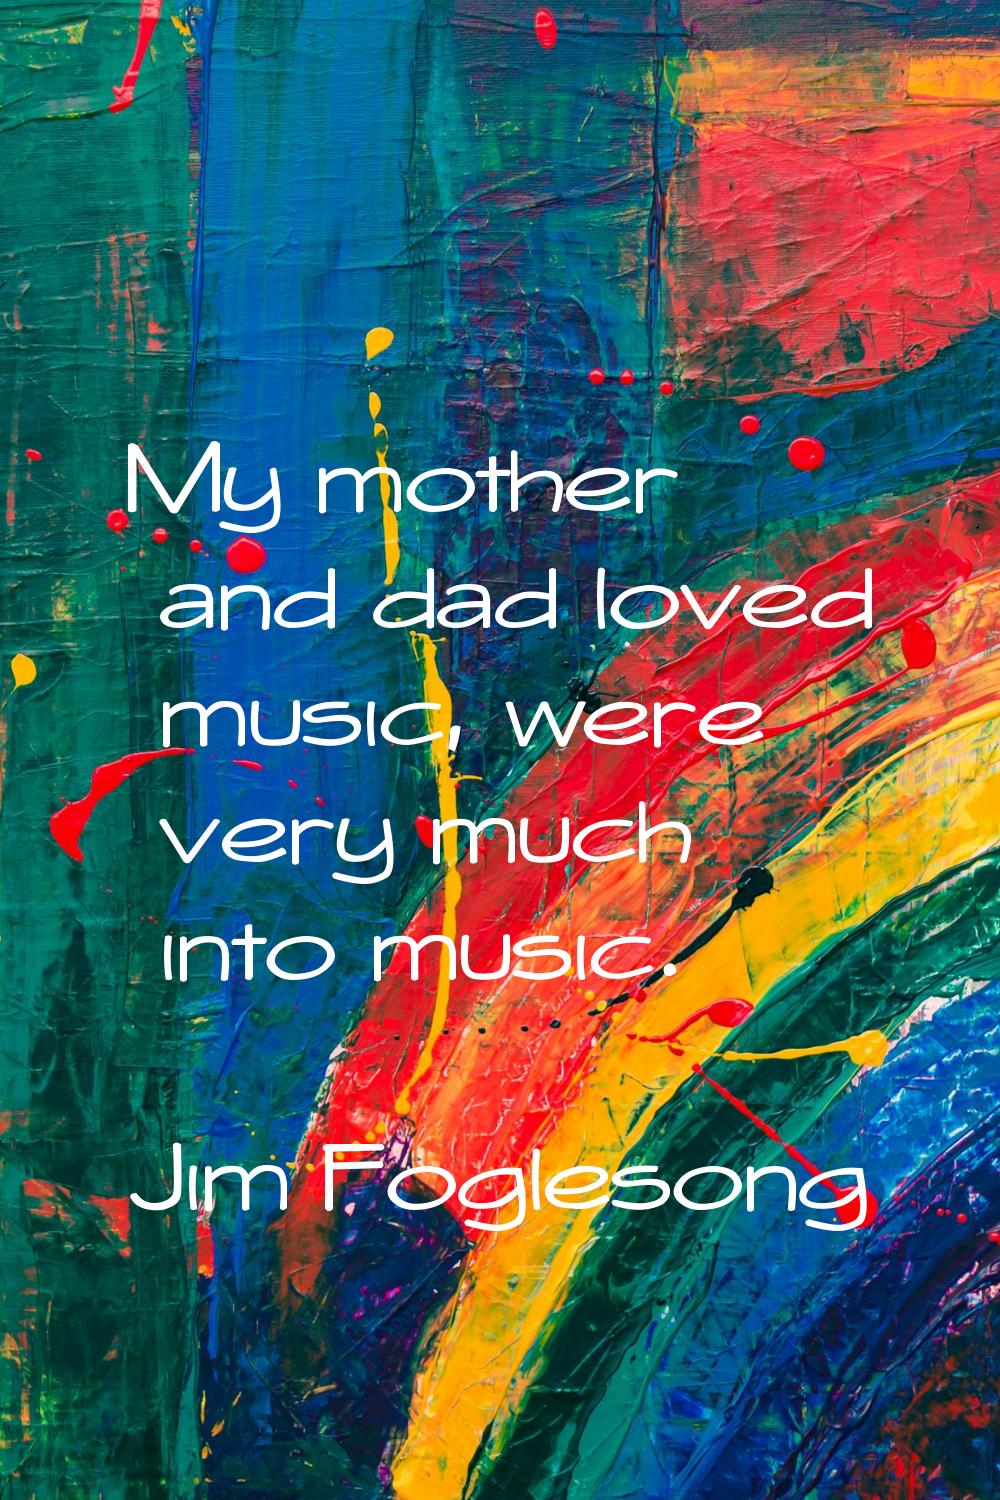 My mother and dad loved music, were very much into music.